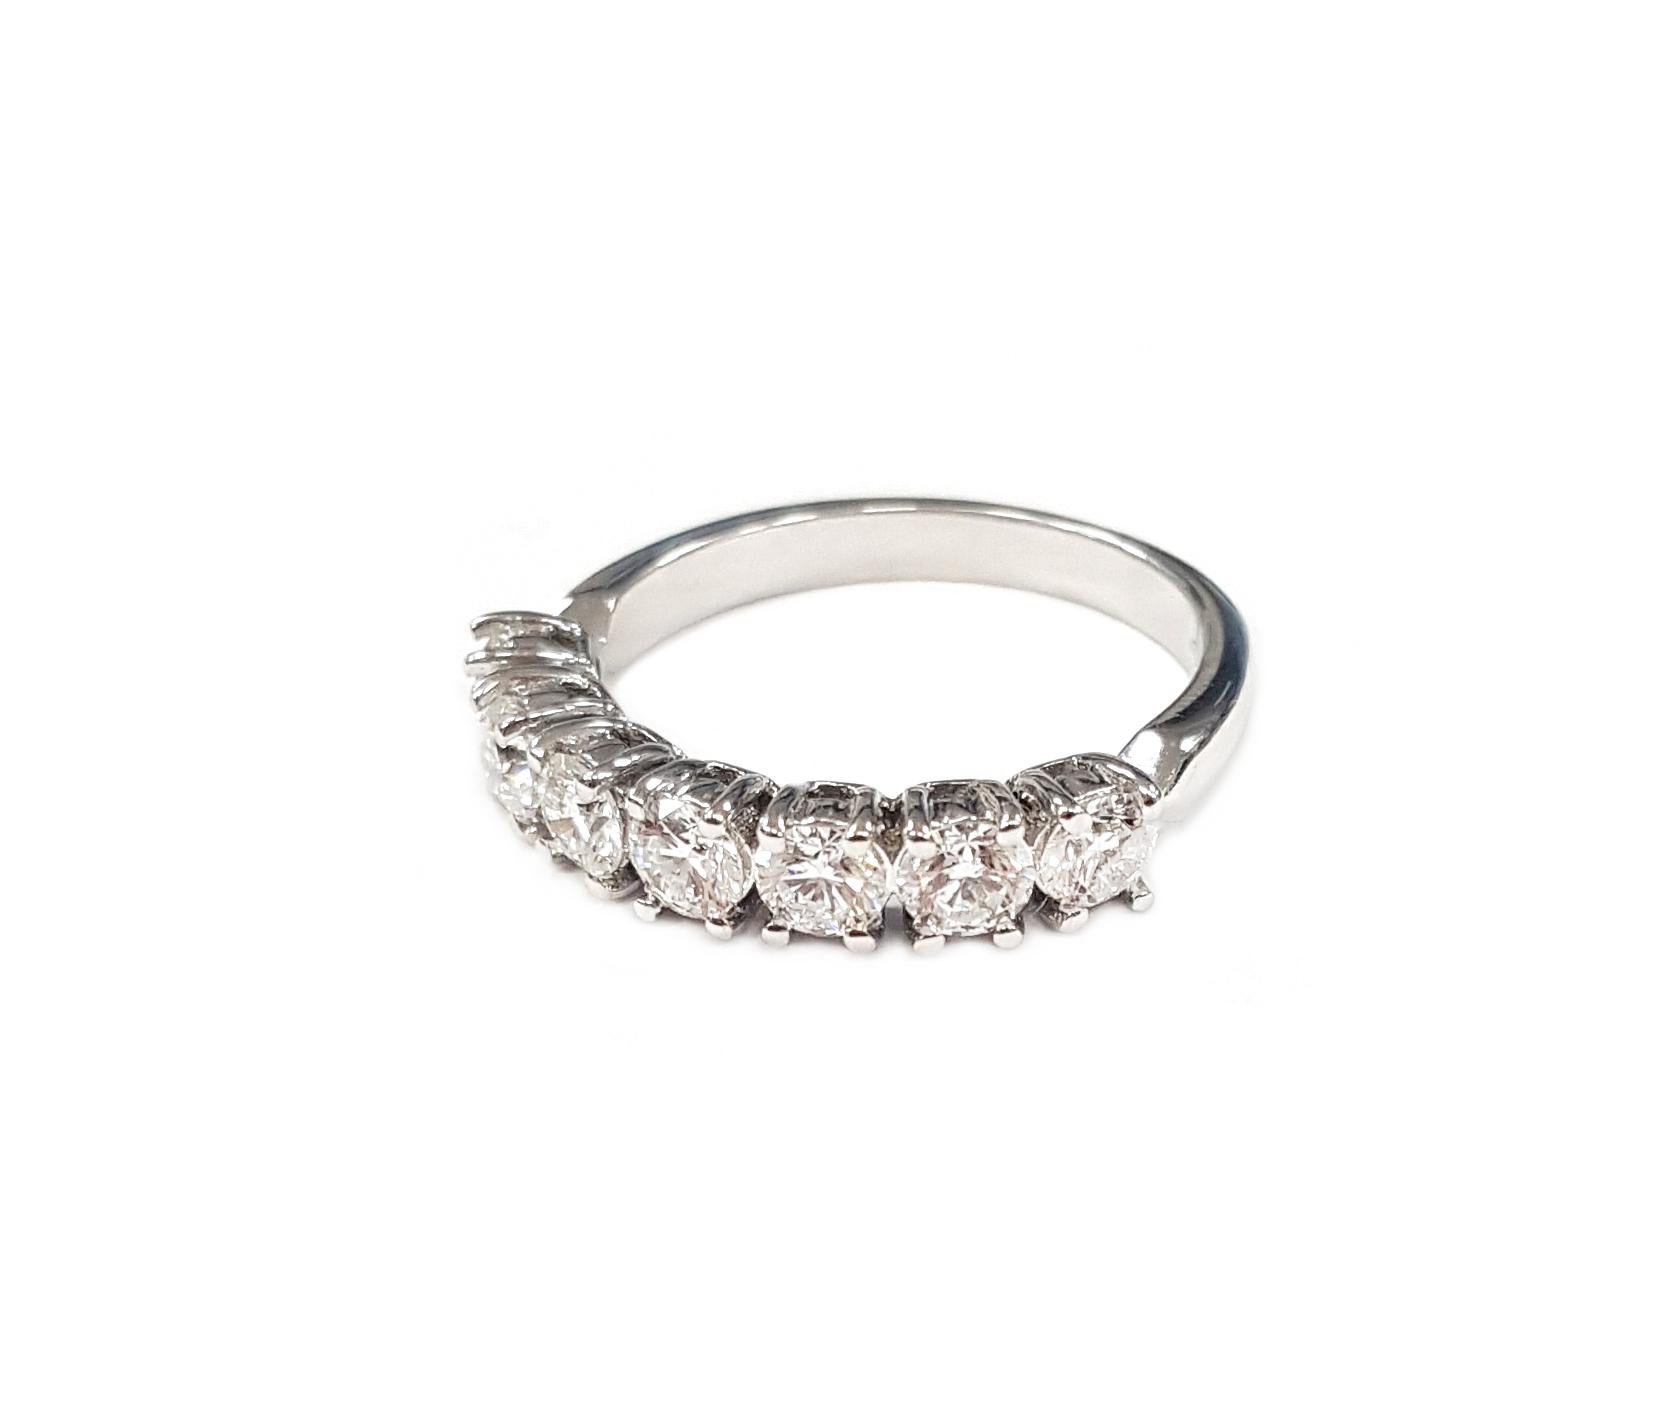 Contemporary 21st Century 18 Karat White Gold Seven Diamonds Anniversary Stackable Ring For Sale